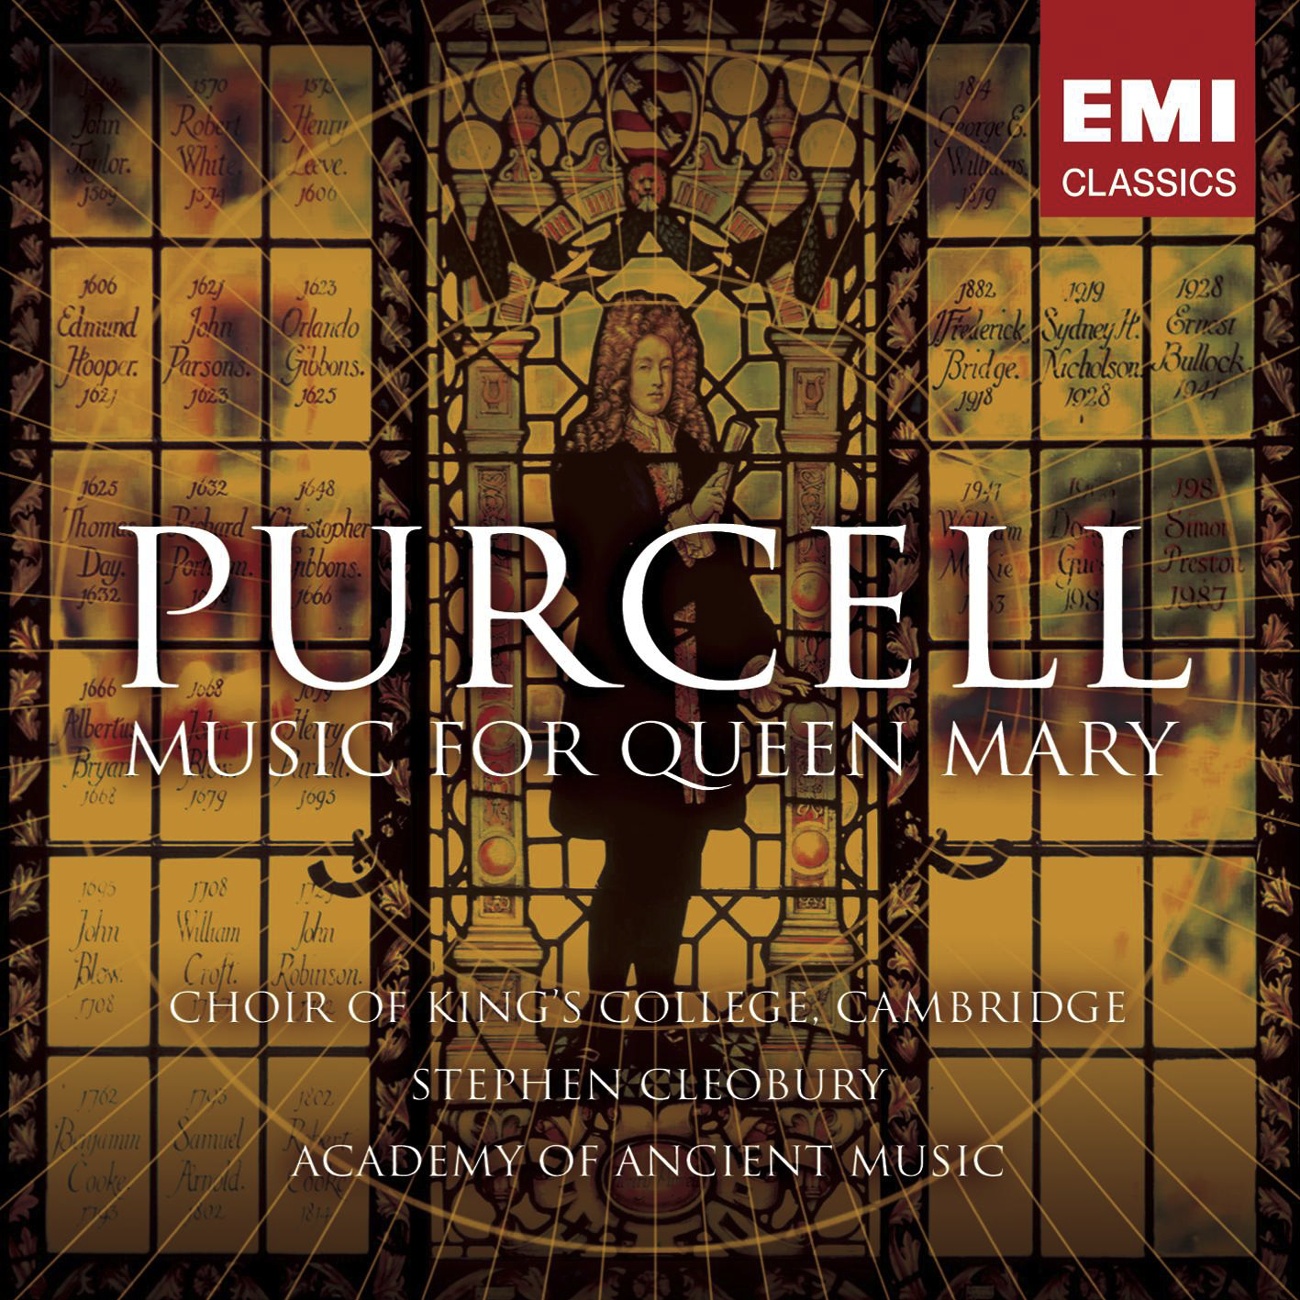 Music for the Funeral of Queen Mary 1695: Canzona Z860ii